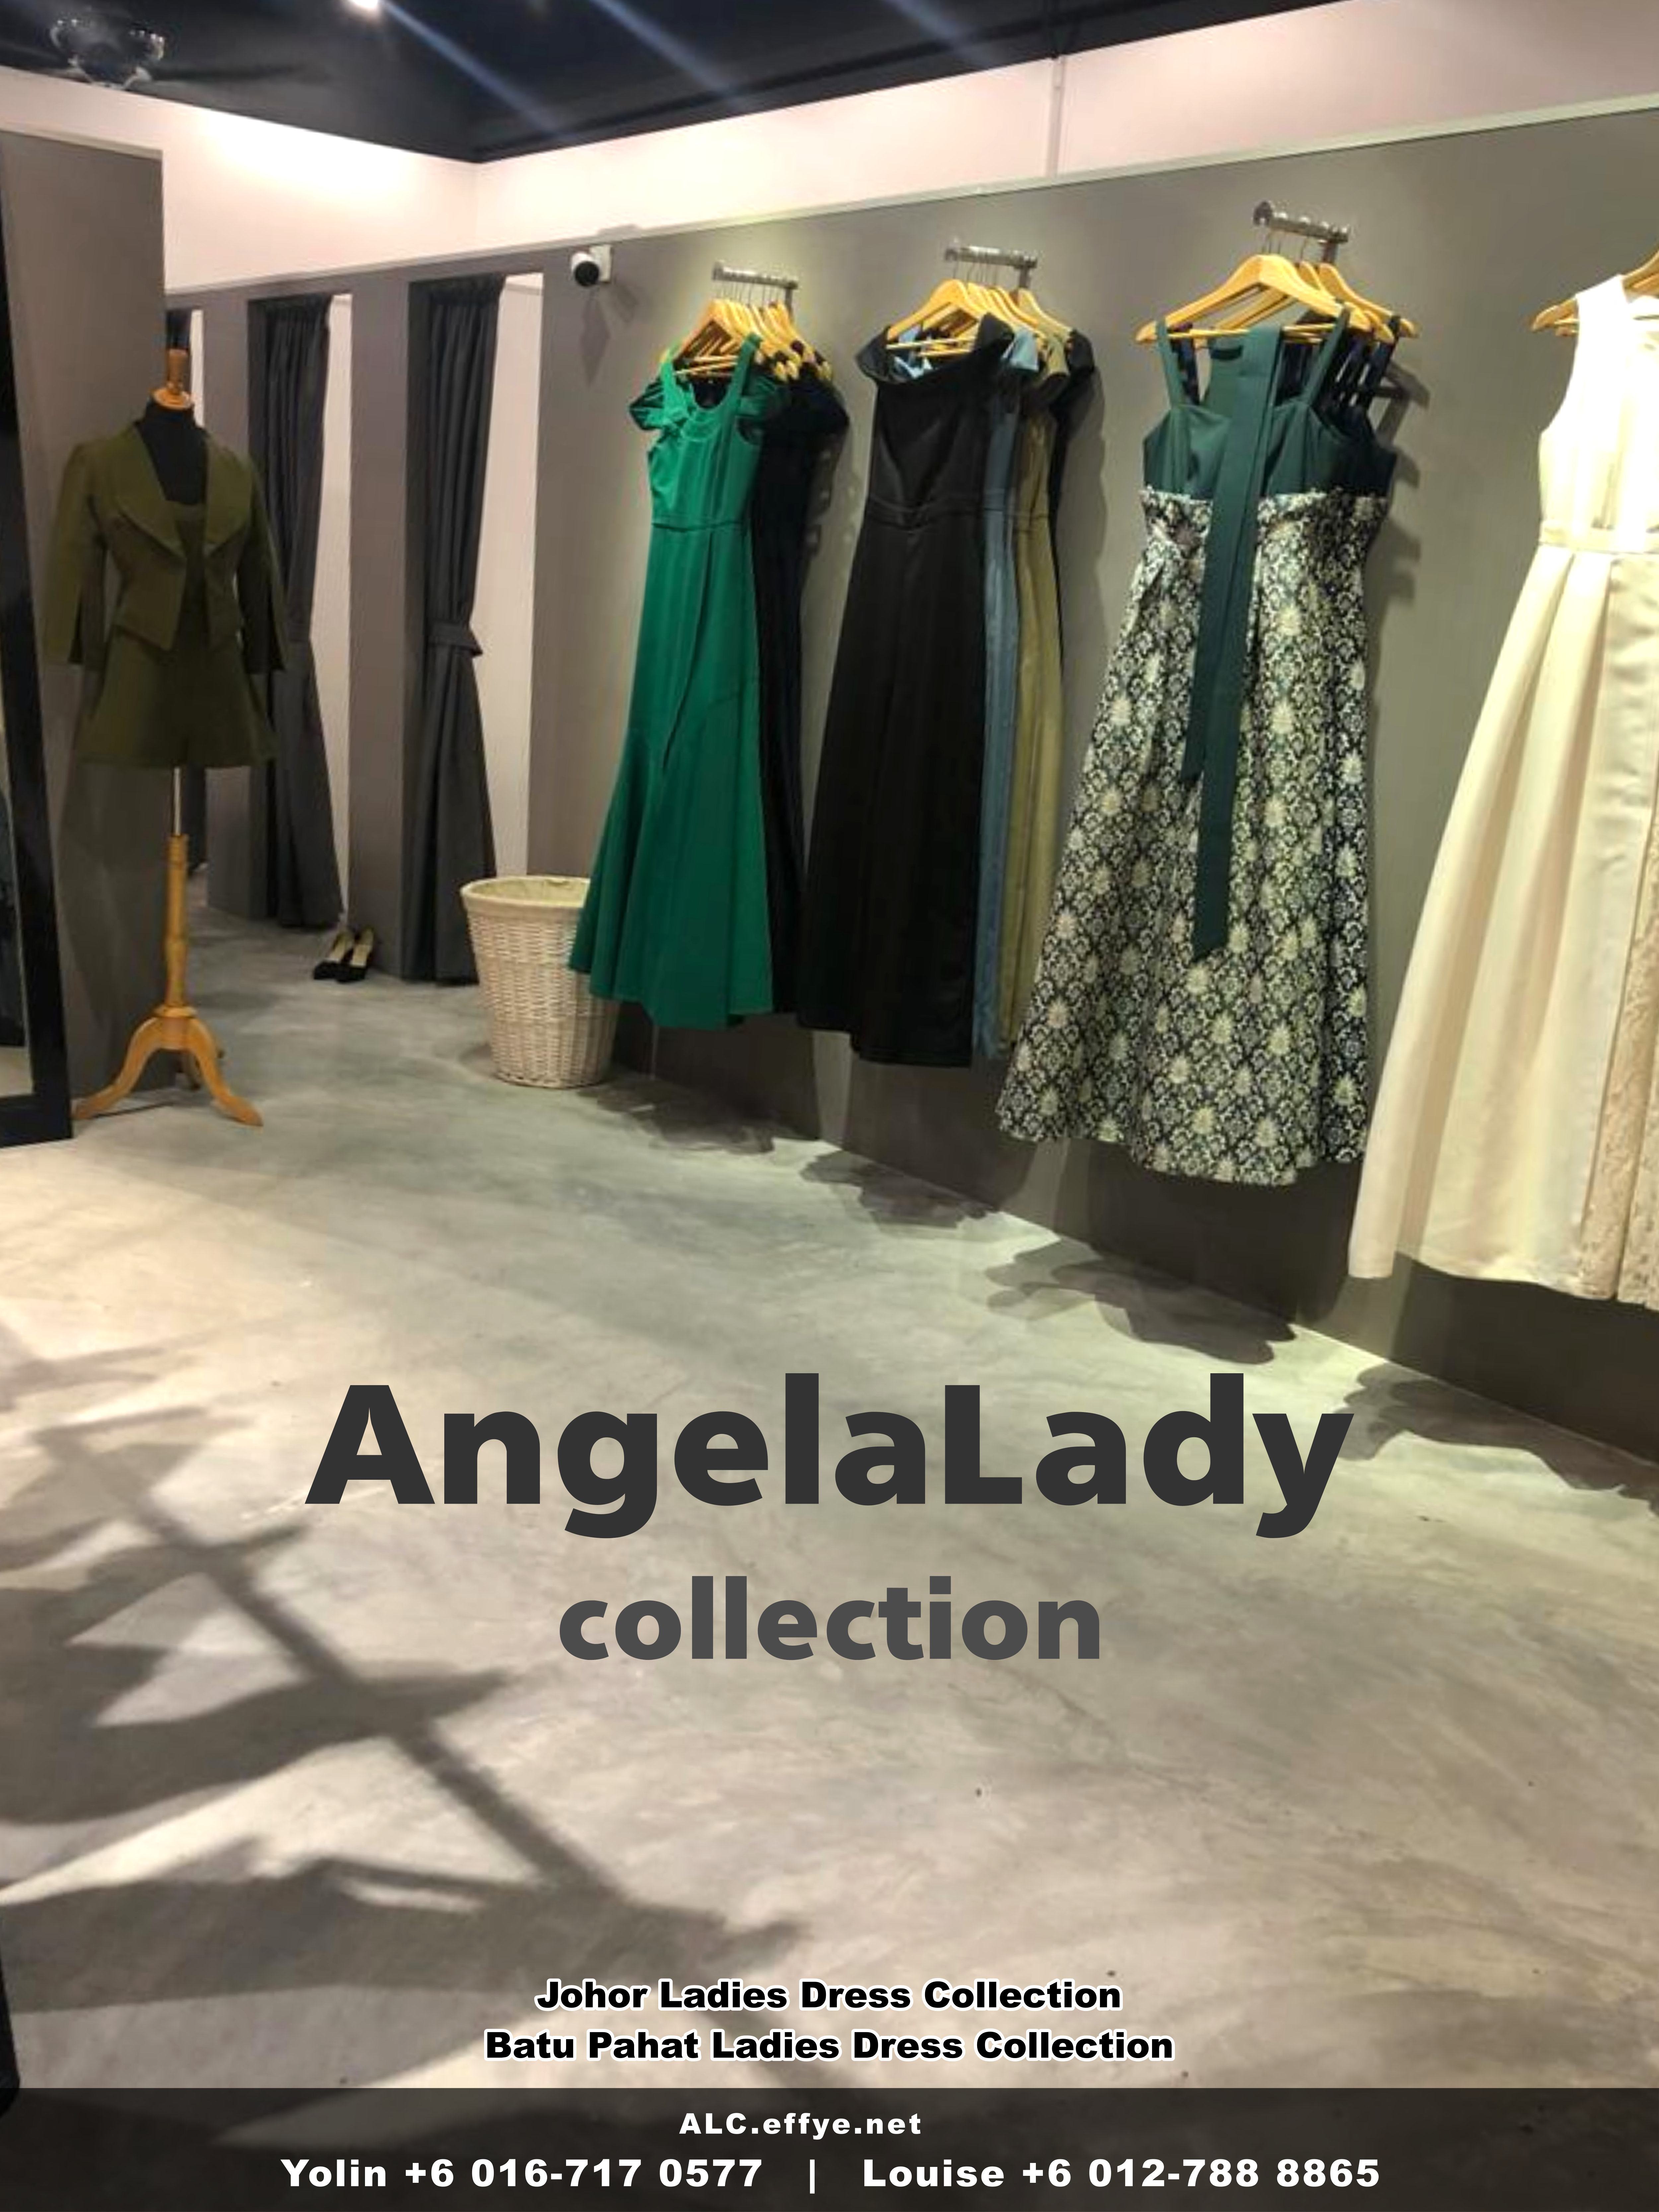 Johor Batu Pahat Ladies Dress Boutique Angela Lady Collection Dinner Dress Evening Gown Maxi Dress Evening Dress Gown Boutique Fashion Lady Apparel Clothes Jeans Skirt Pants Malaysia A01-008